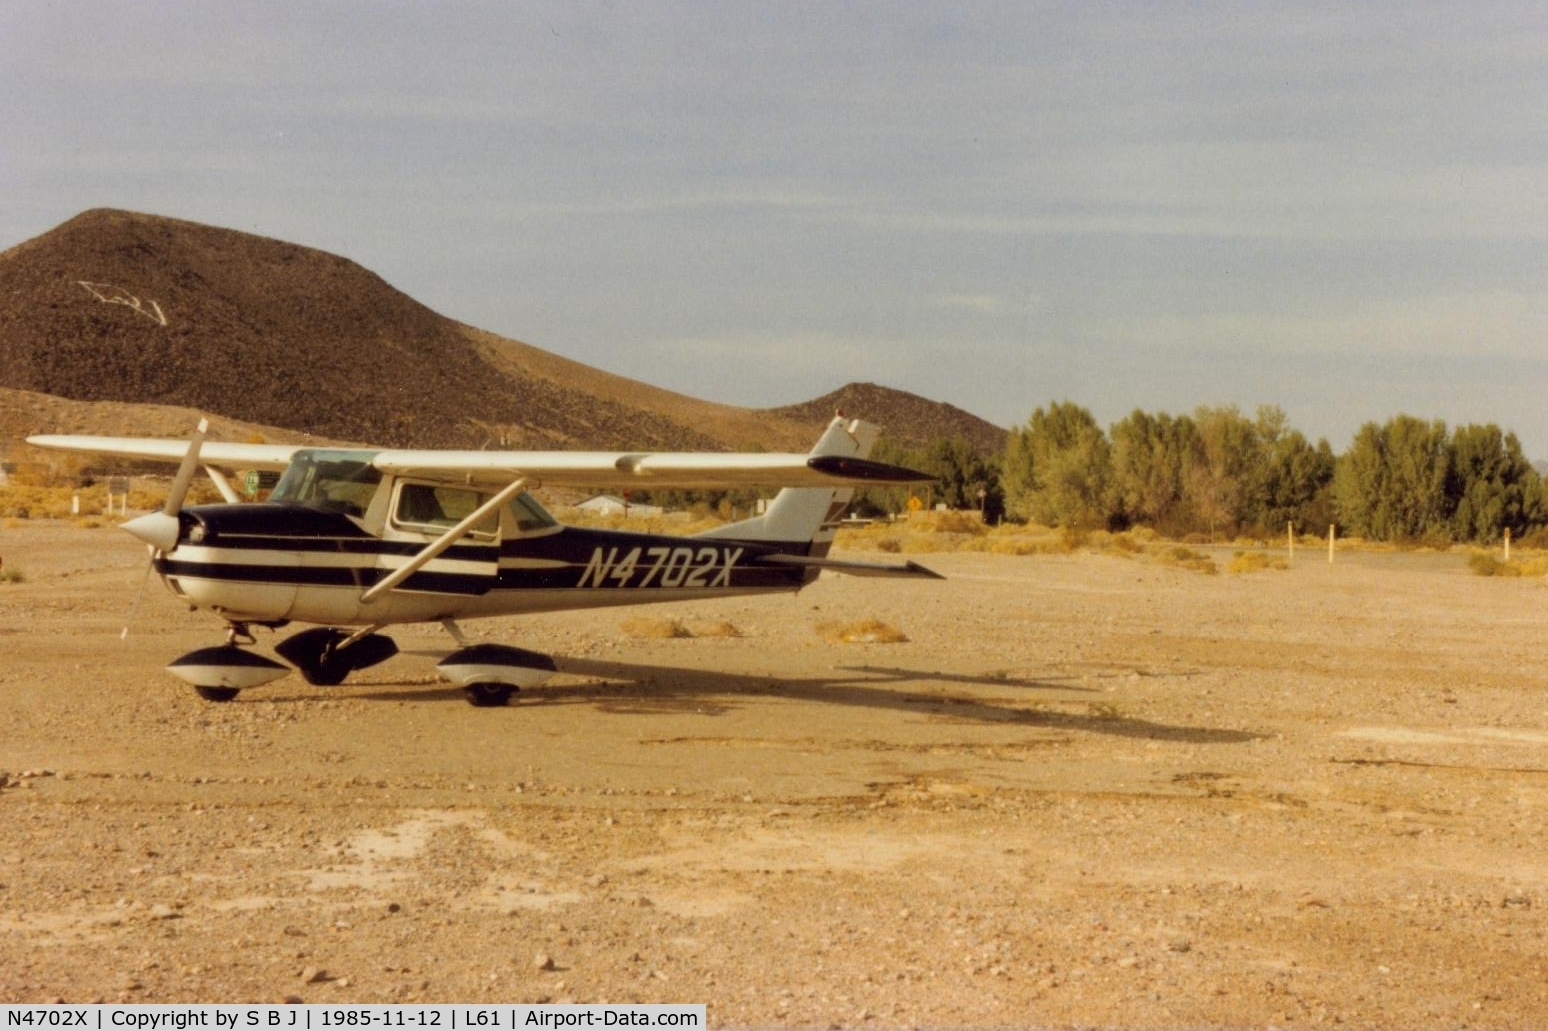 N4702X, 1966 Cessna 150G C/N 15064752, 02X at the Shoshone airport outside of Death Valley,Calif. 02X was a nice little airplane.This was in Nov. of 1985.